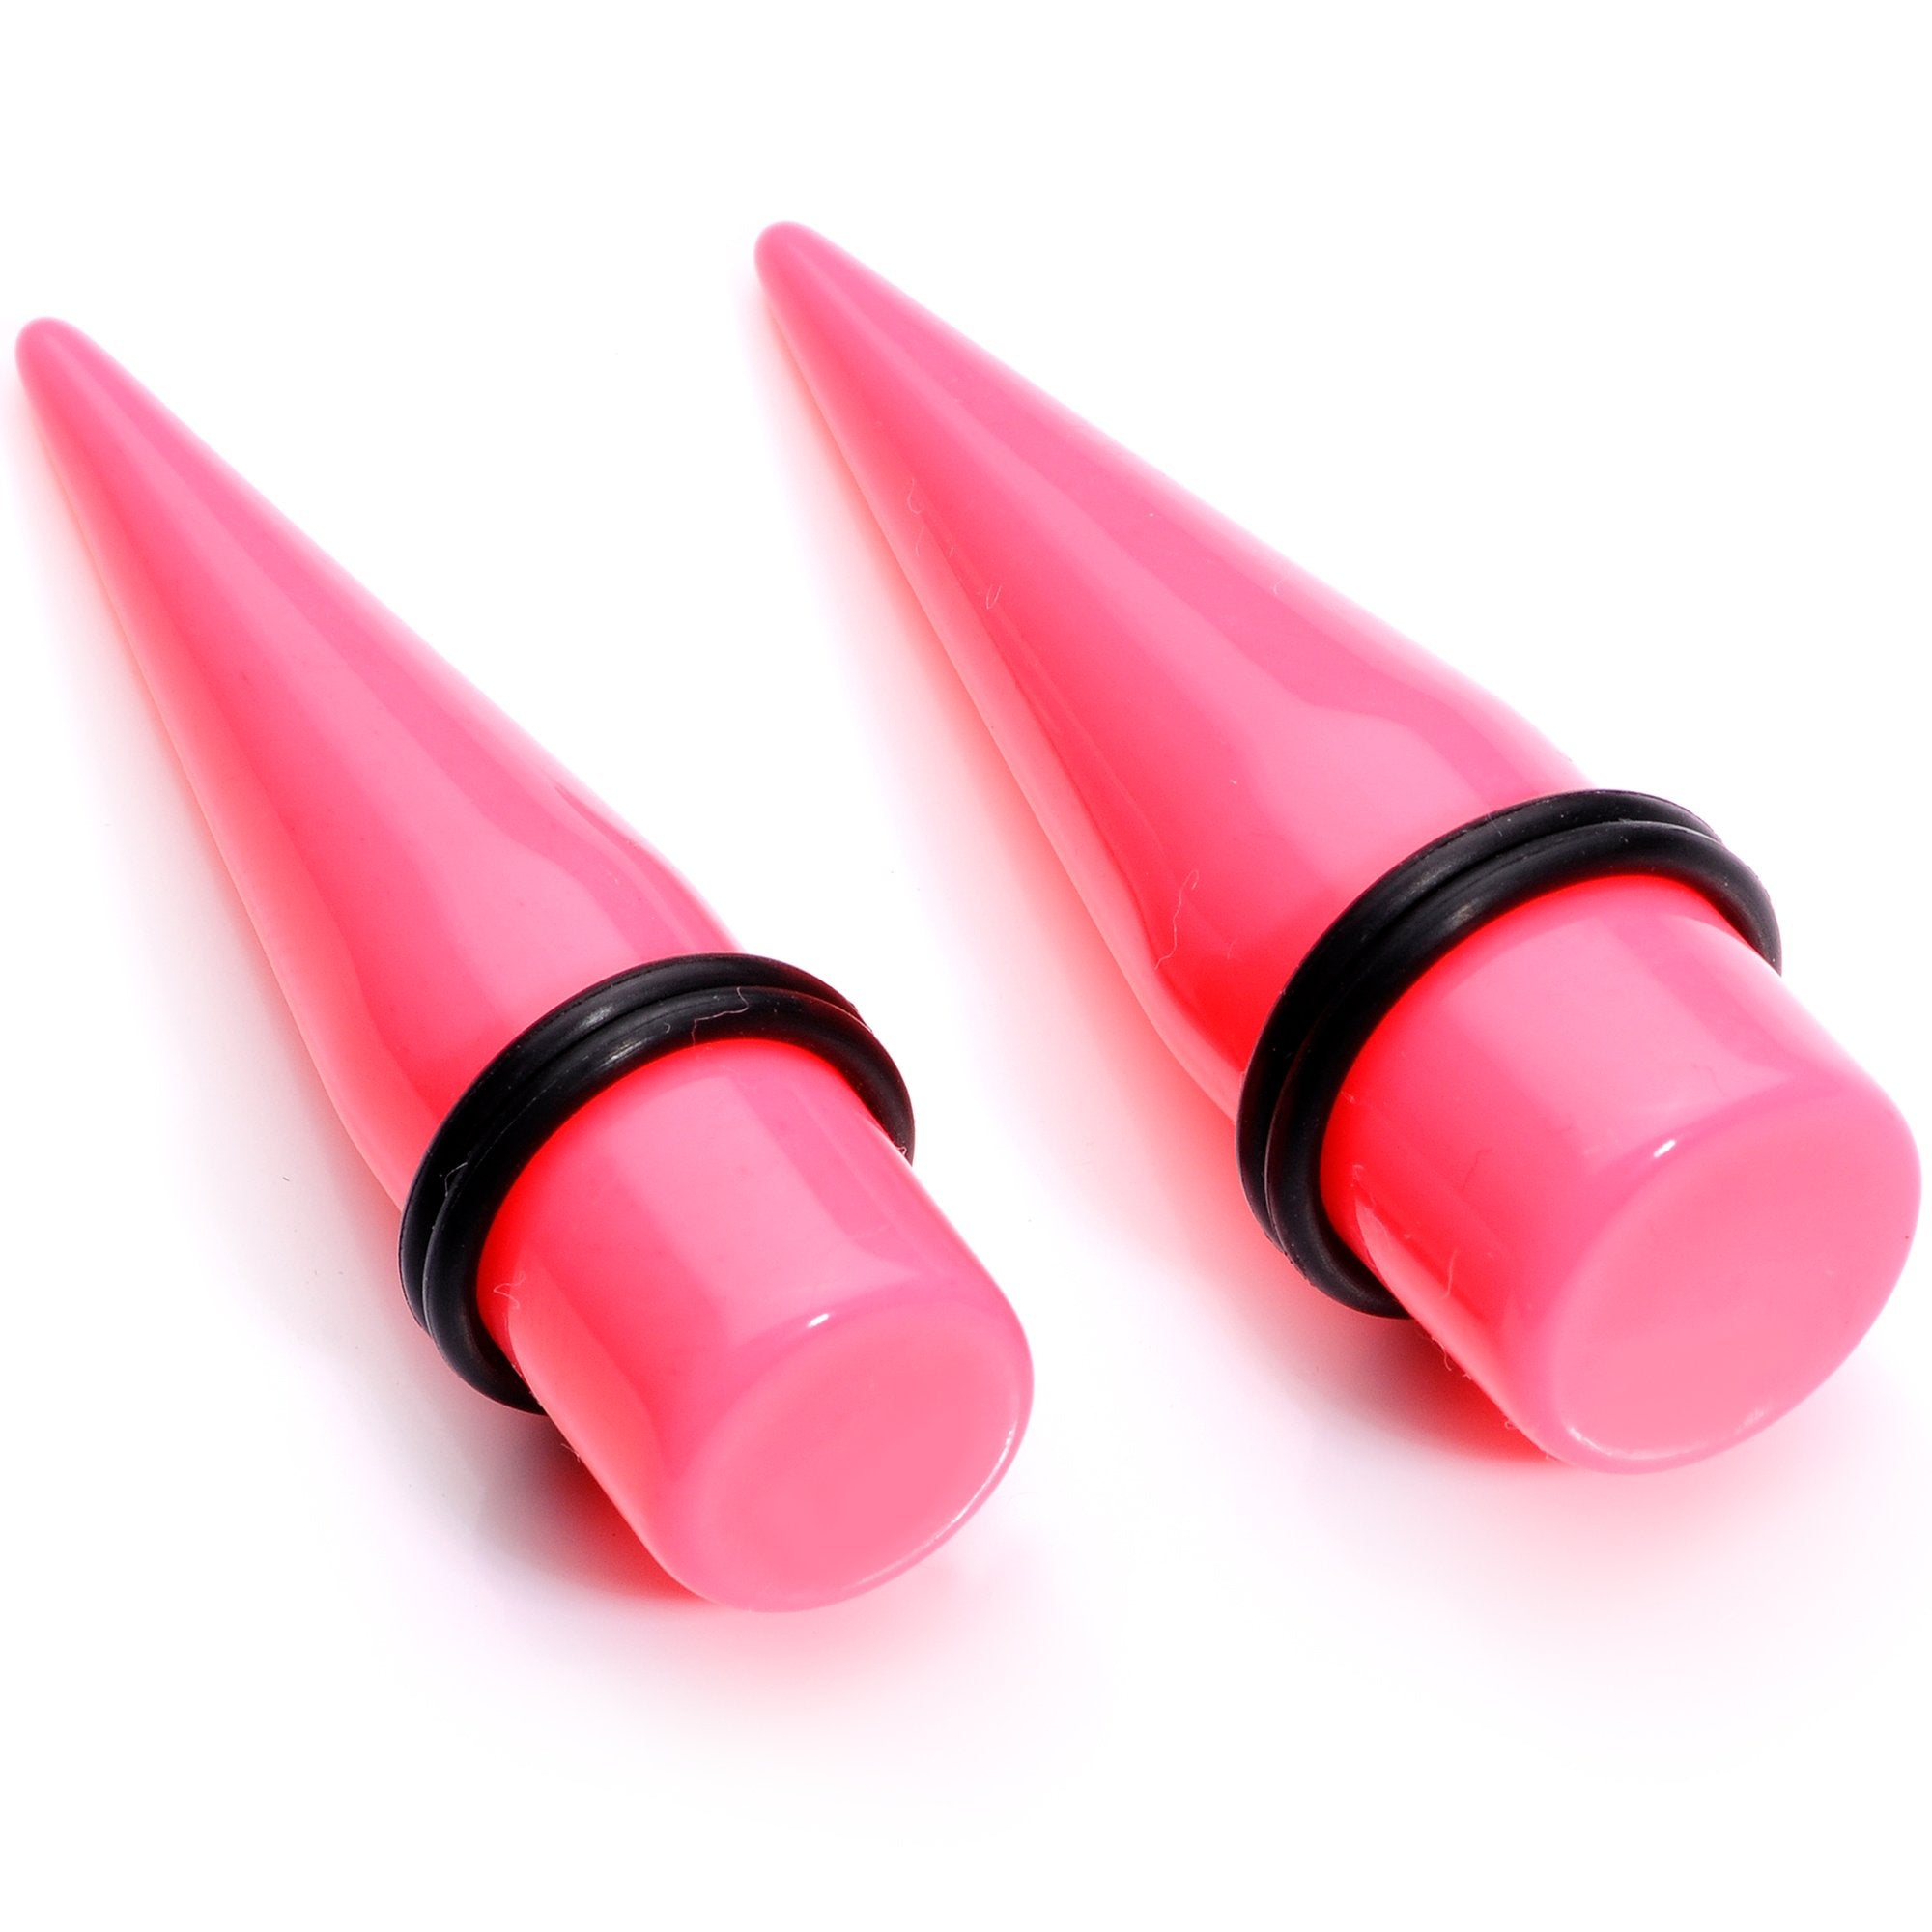 00 Gauge to 1 inch 18 Piece Bright Pink Acrylic Ear Stretching Taper Kit Set